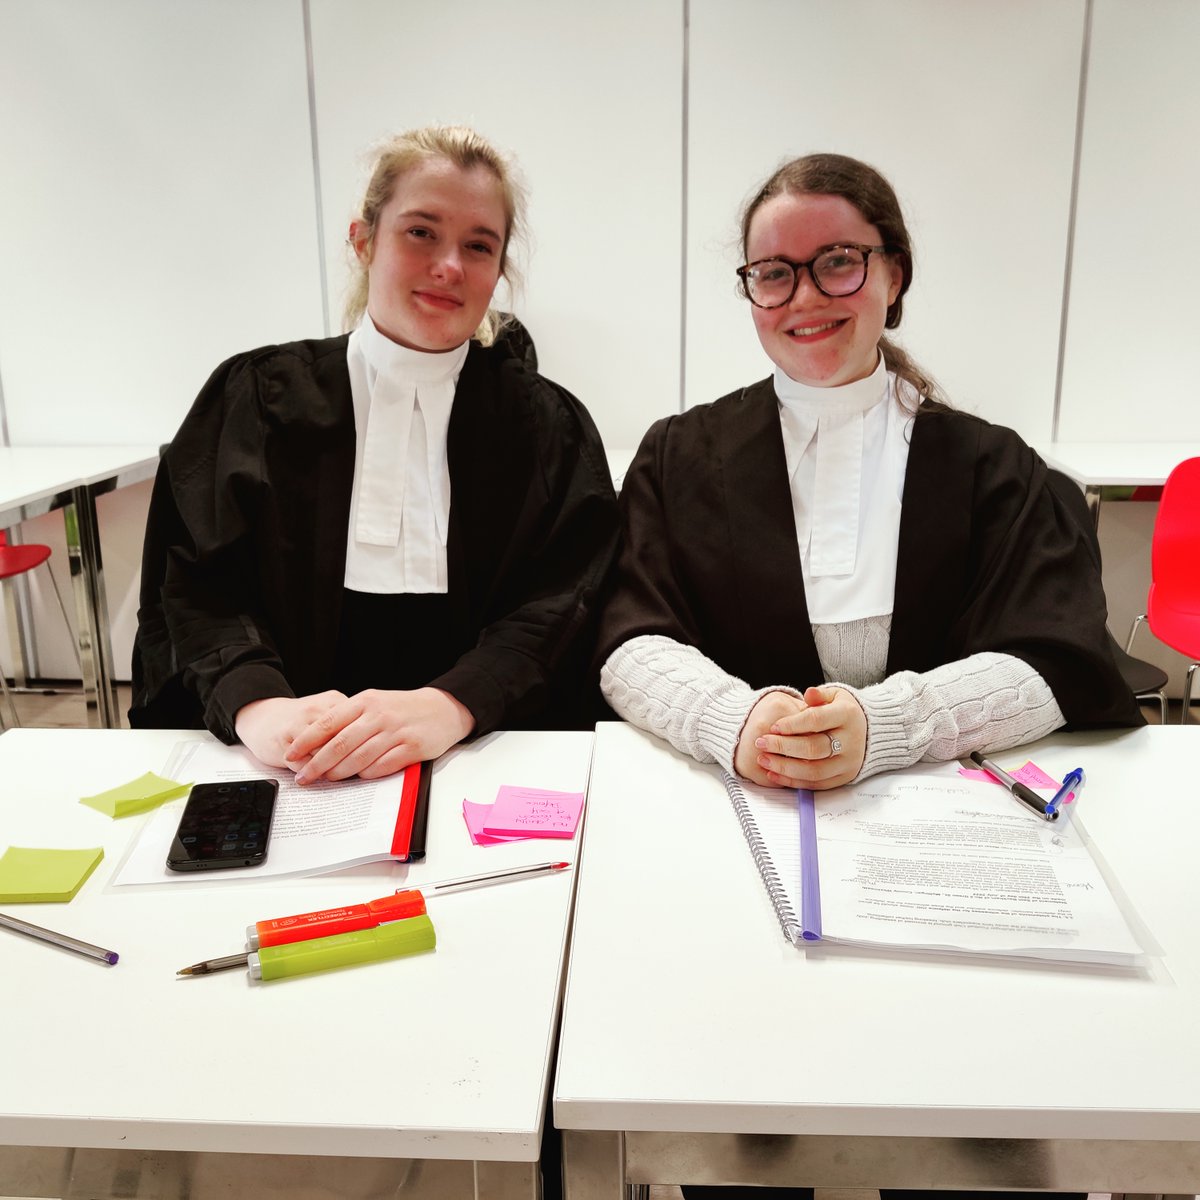 Wonderful to see our @TUS_BusMgmt Bachelor of Business and Law students showing off the skills developed in their #LegalSkills modules during #MockTrial for the TY students during @TUS_ie @TUS_Athlone_ #OpenDay.Well done! Looking forward to our new #LawDegree in Sept 23